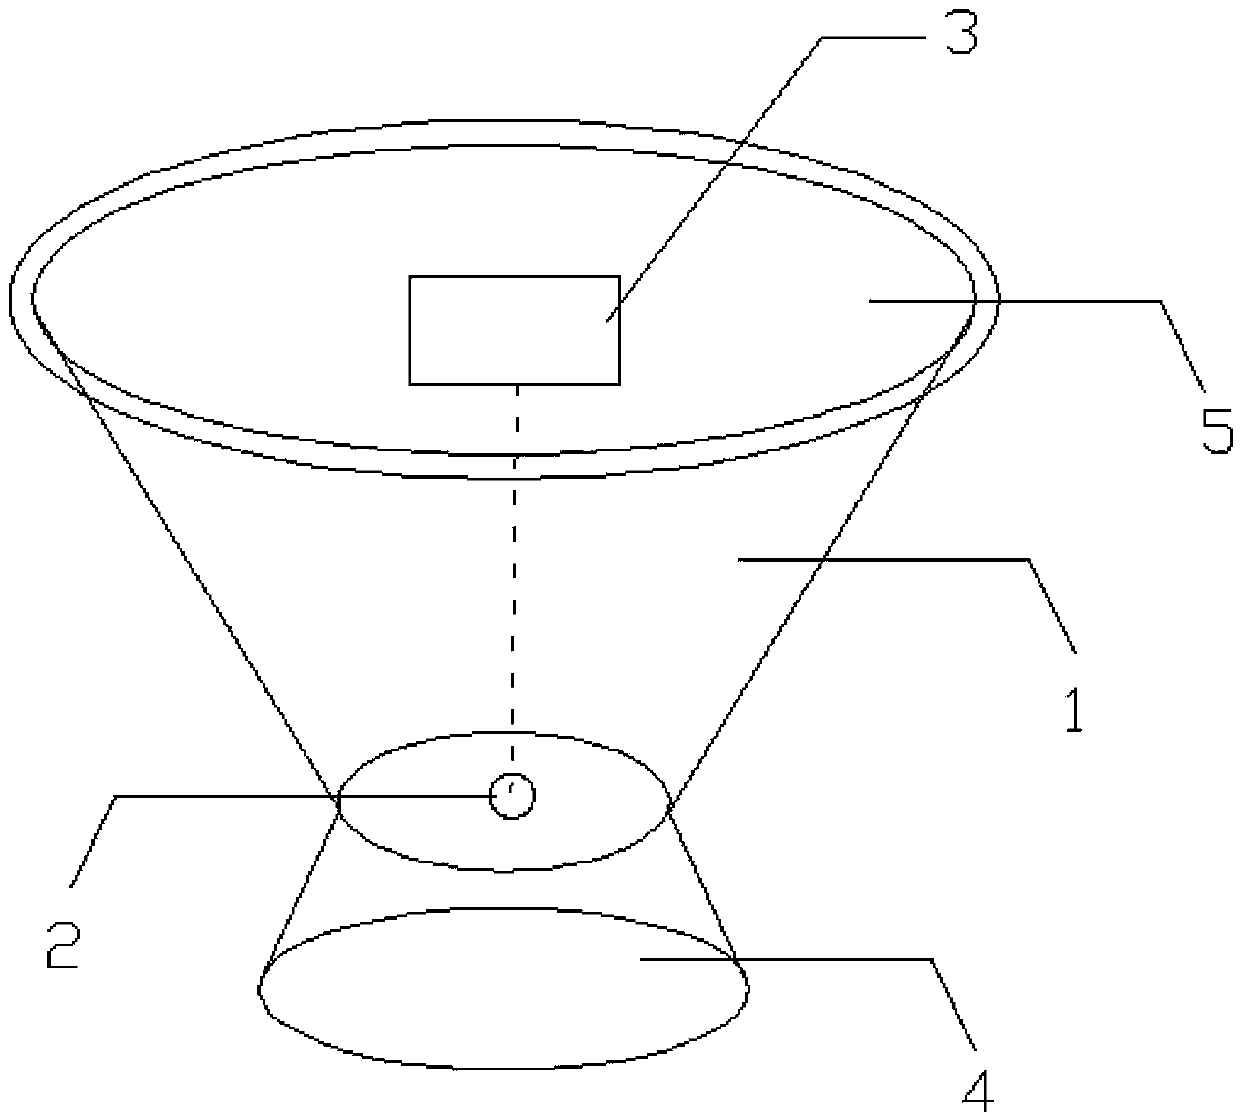 Infant feeding bowl capable of displaying temperature values